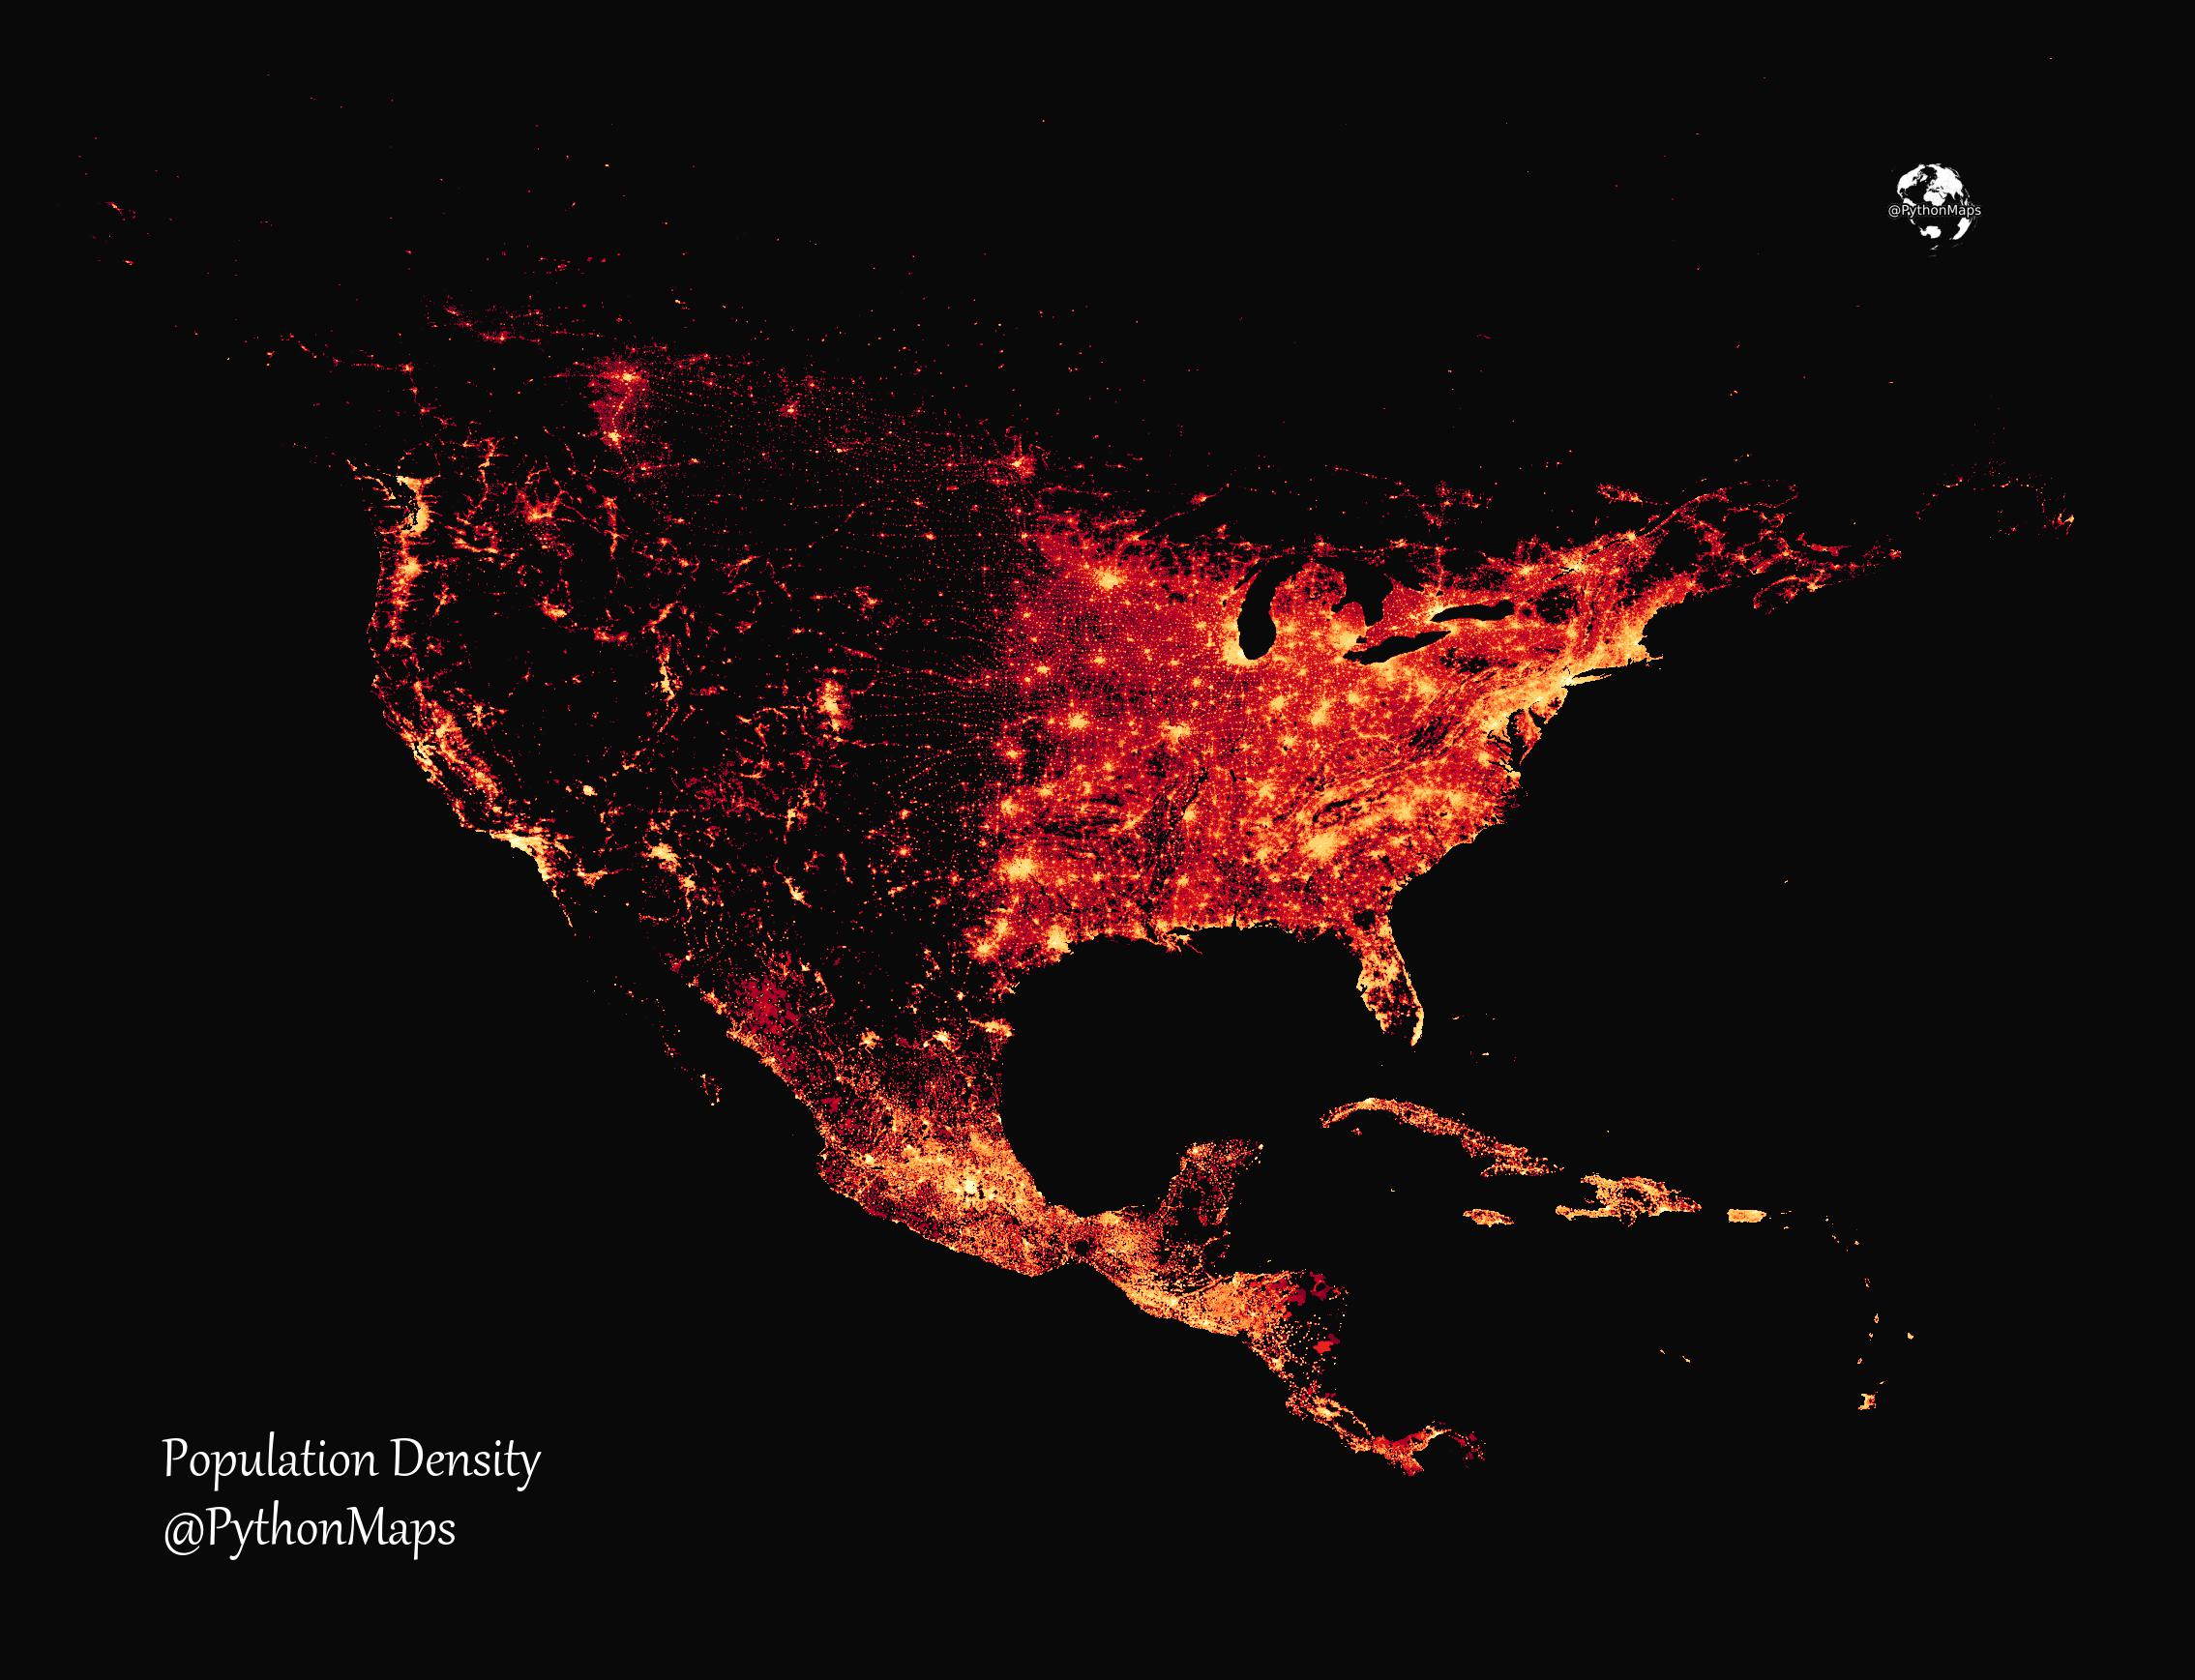 The Population density of North America